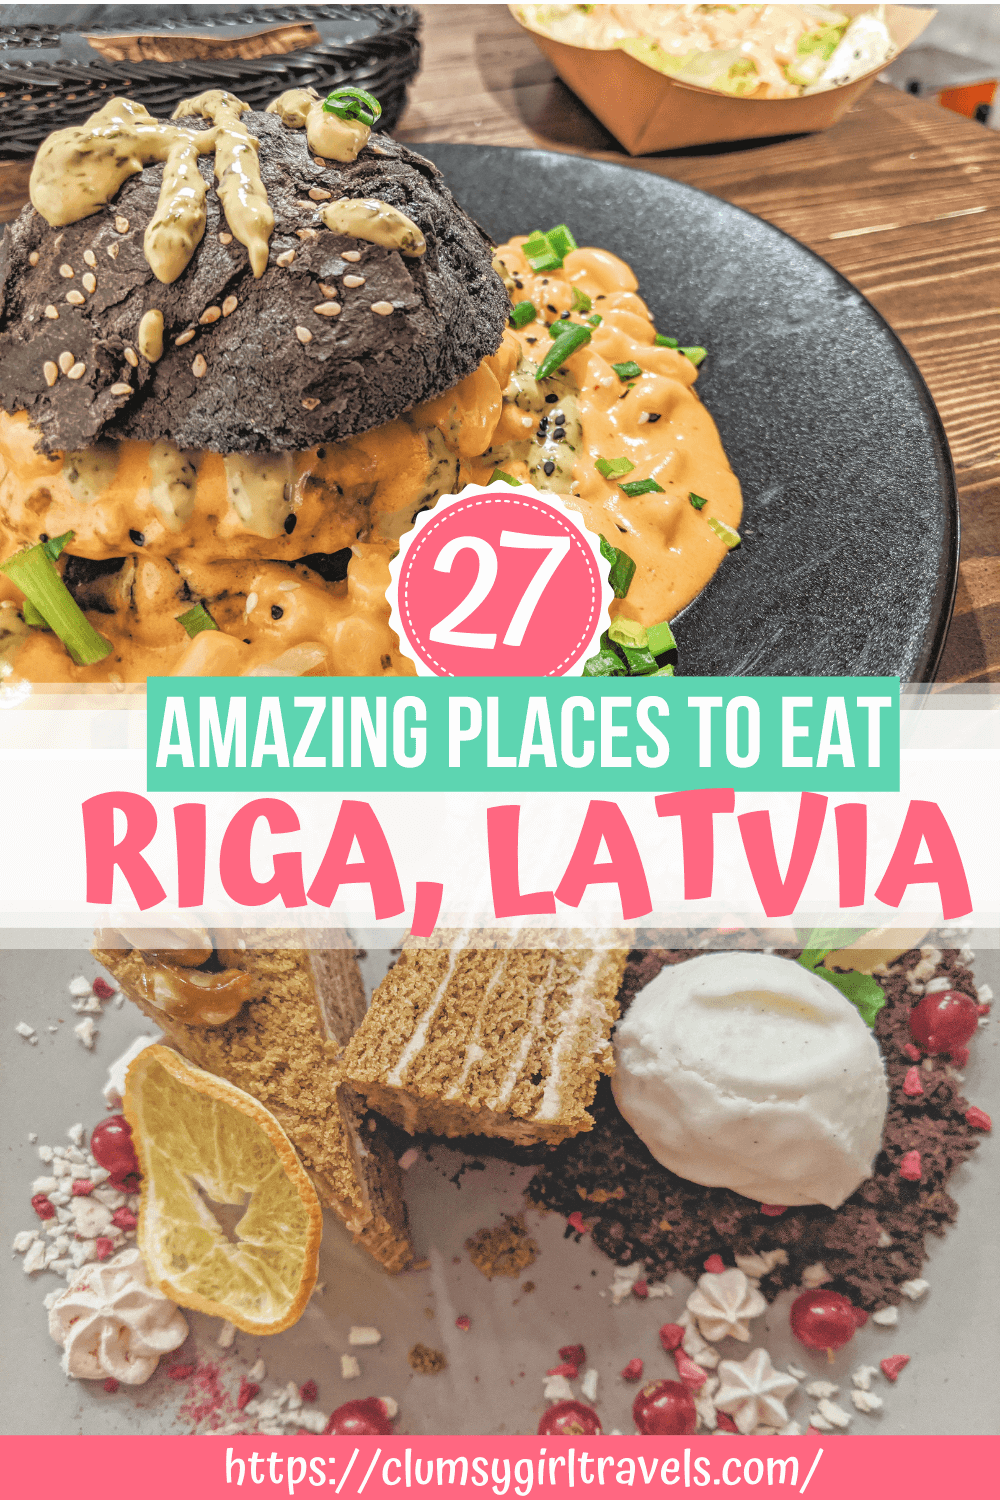 Are you looking for the best places to eat in Riga, Latvia? Look no further! This guide will help you decide where to eat in Riga, Latvia's capital. #rigafood #rigarestaurants, #wheretoeatinriga #rigalatviafood